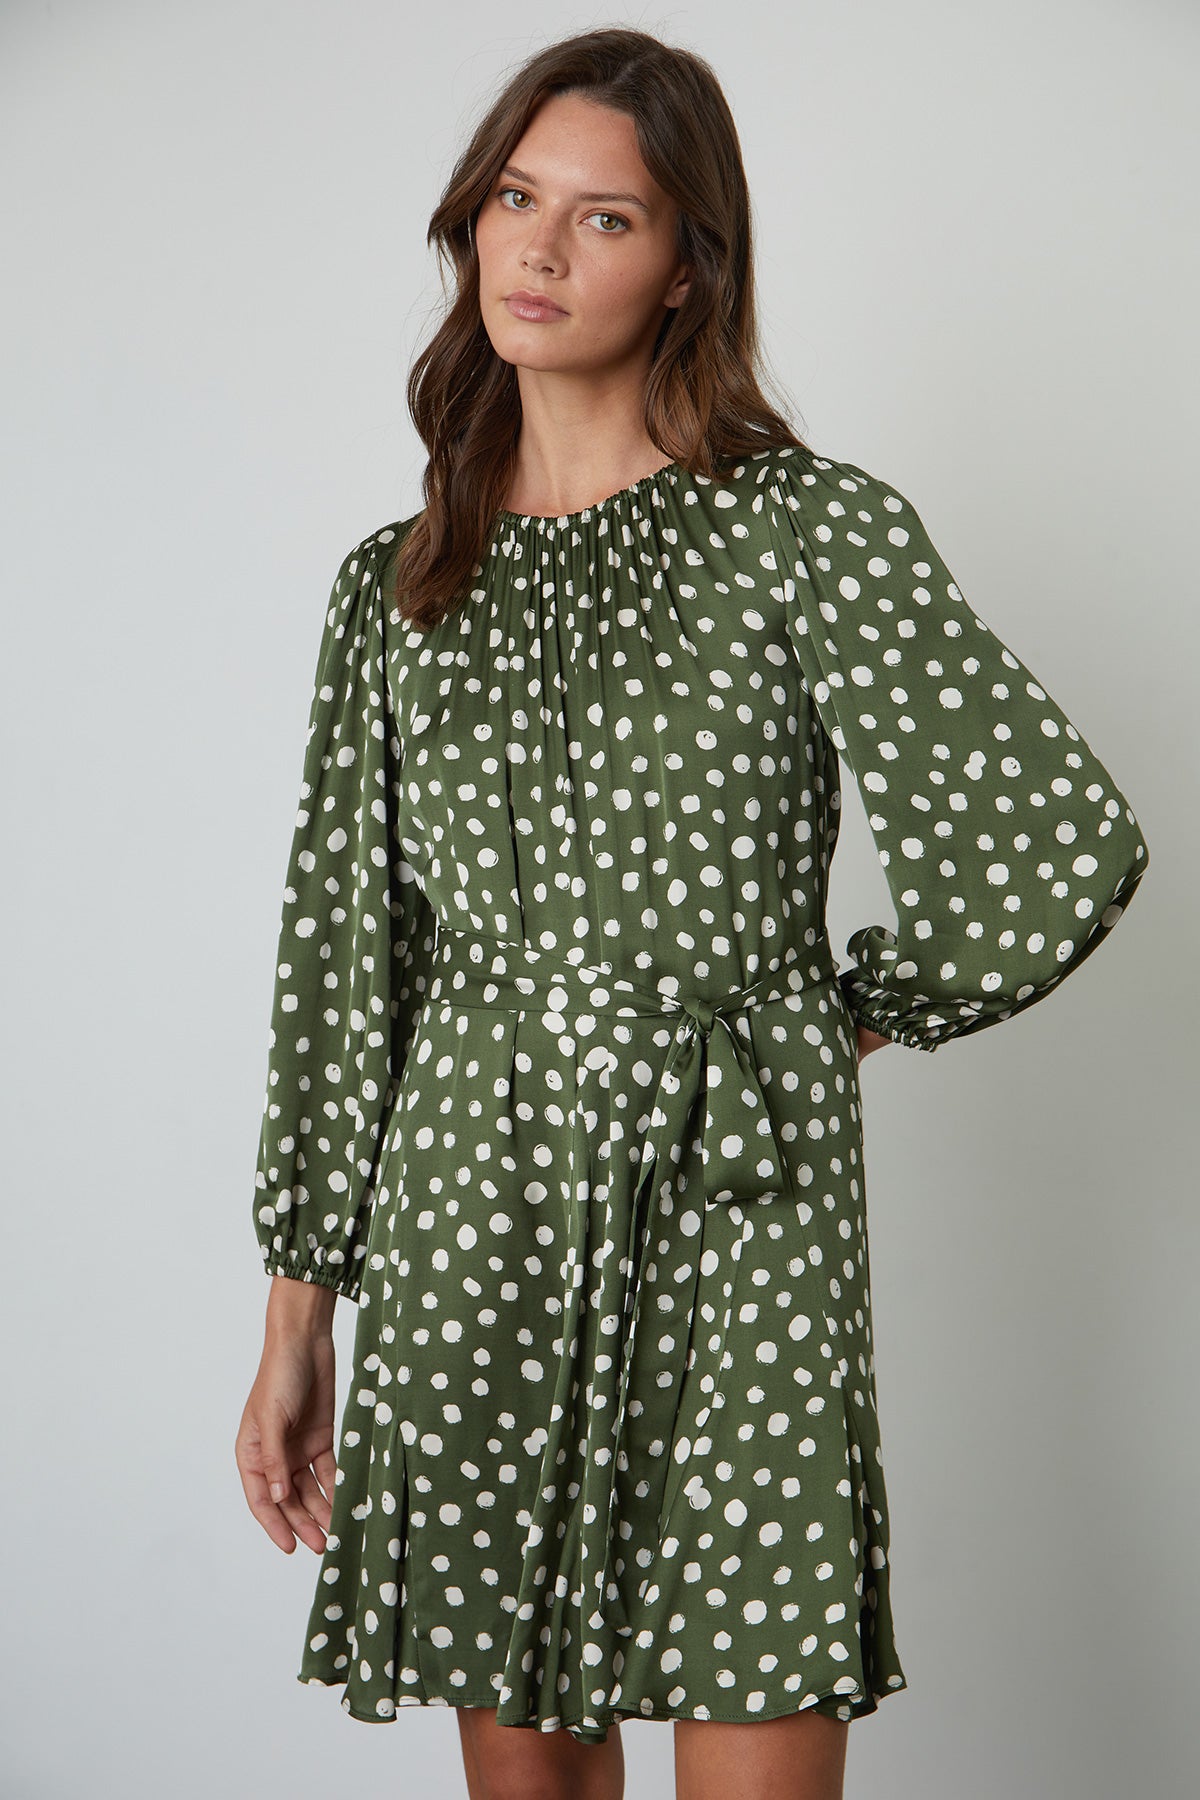 Kenia Polka Dot Dress with Green Background and Cream Dots Tied at Waist front-25078341959873